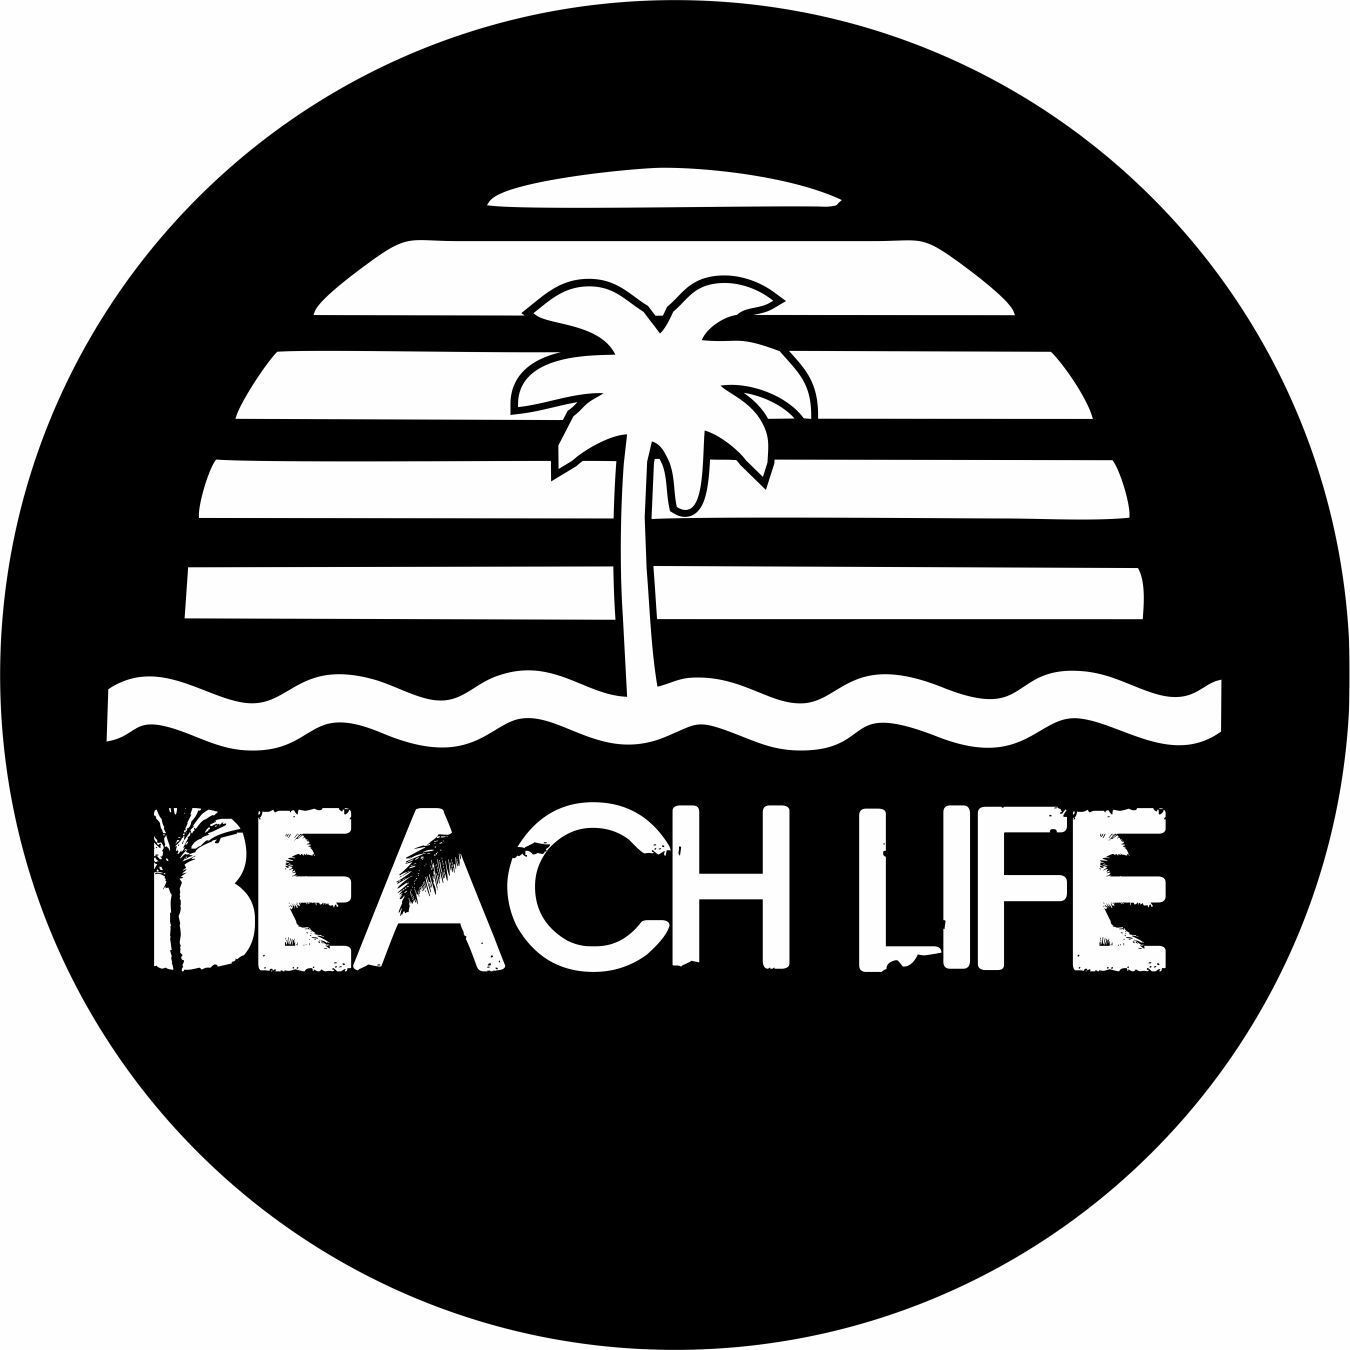 Beach life (Palm Tree) Spare Tire Cover ANY Size, ANY Vehicle,Trailer, Camper RV